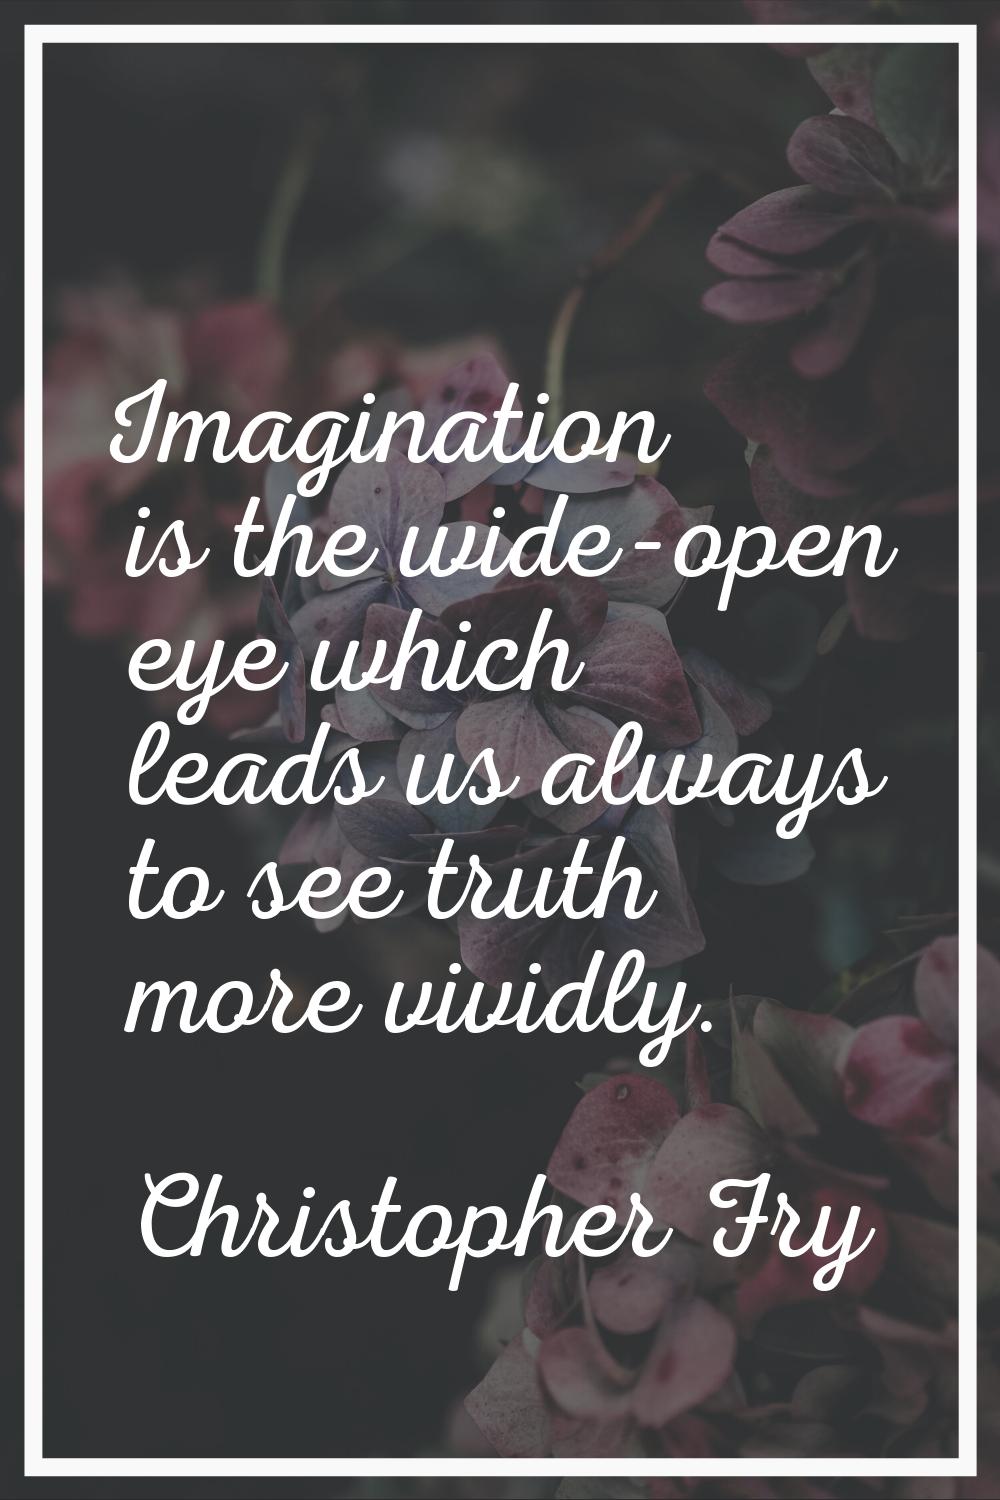 Imagination is the wide-open eye which leads us always to see truth more vividly.